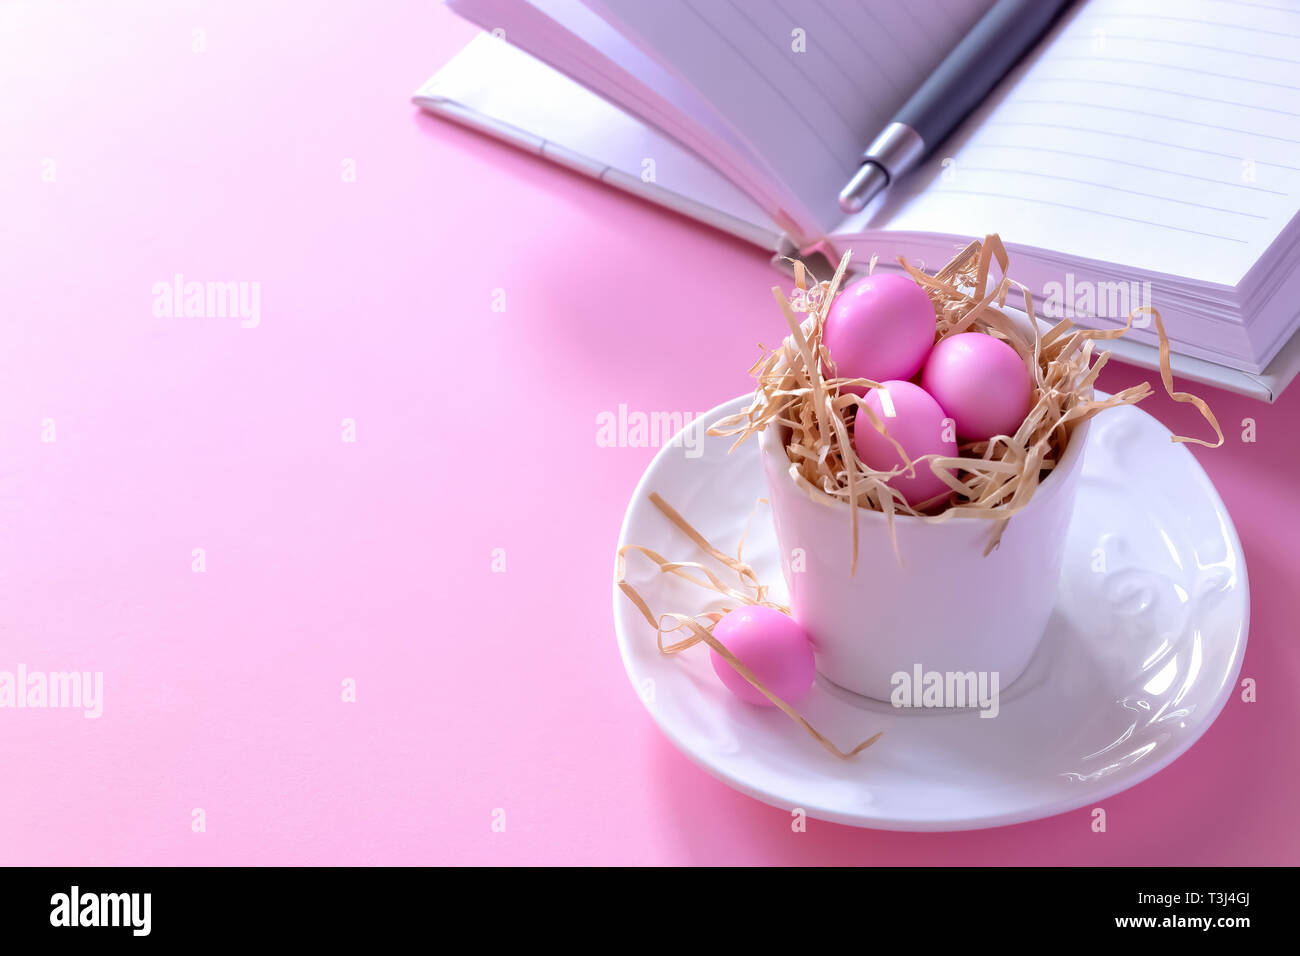 Small pink candy eggs in the cup. Easter celebrate concept. Pink background. Almonds in sugar coating. Copy space. Stock Photo